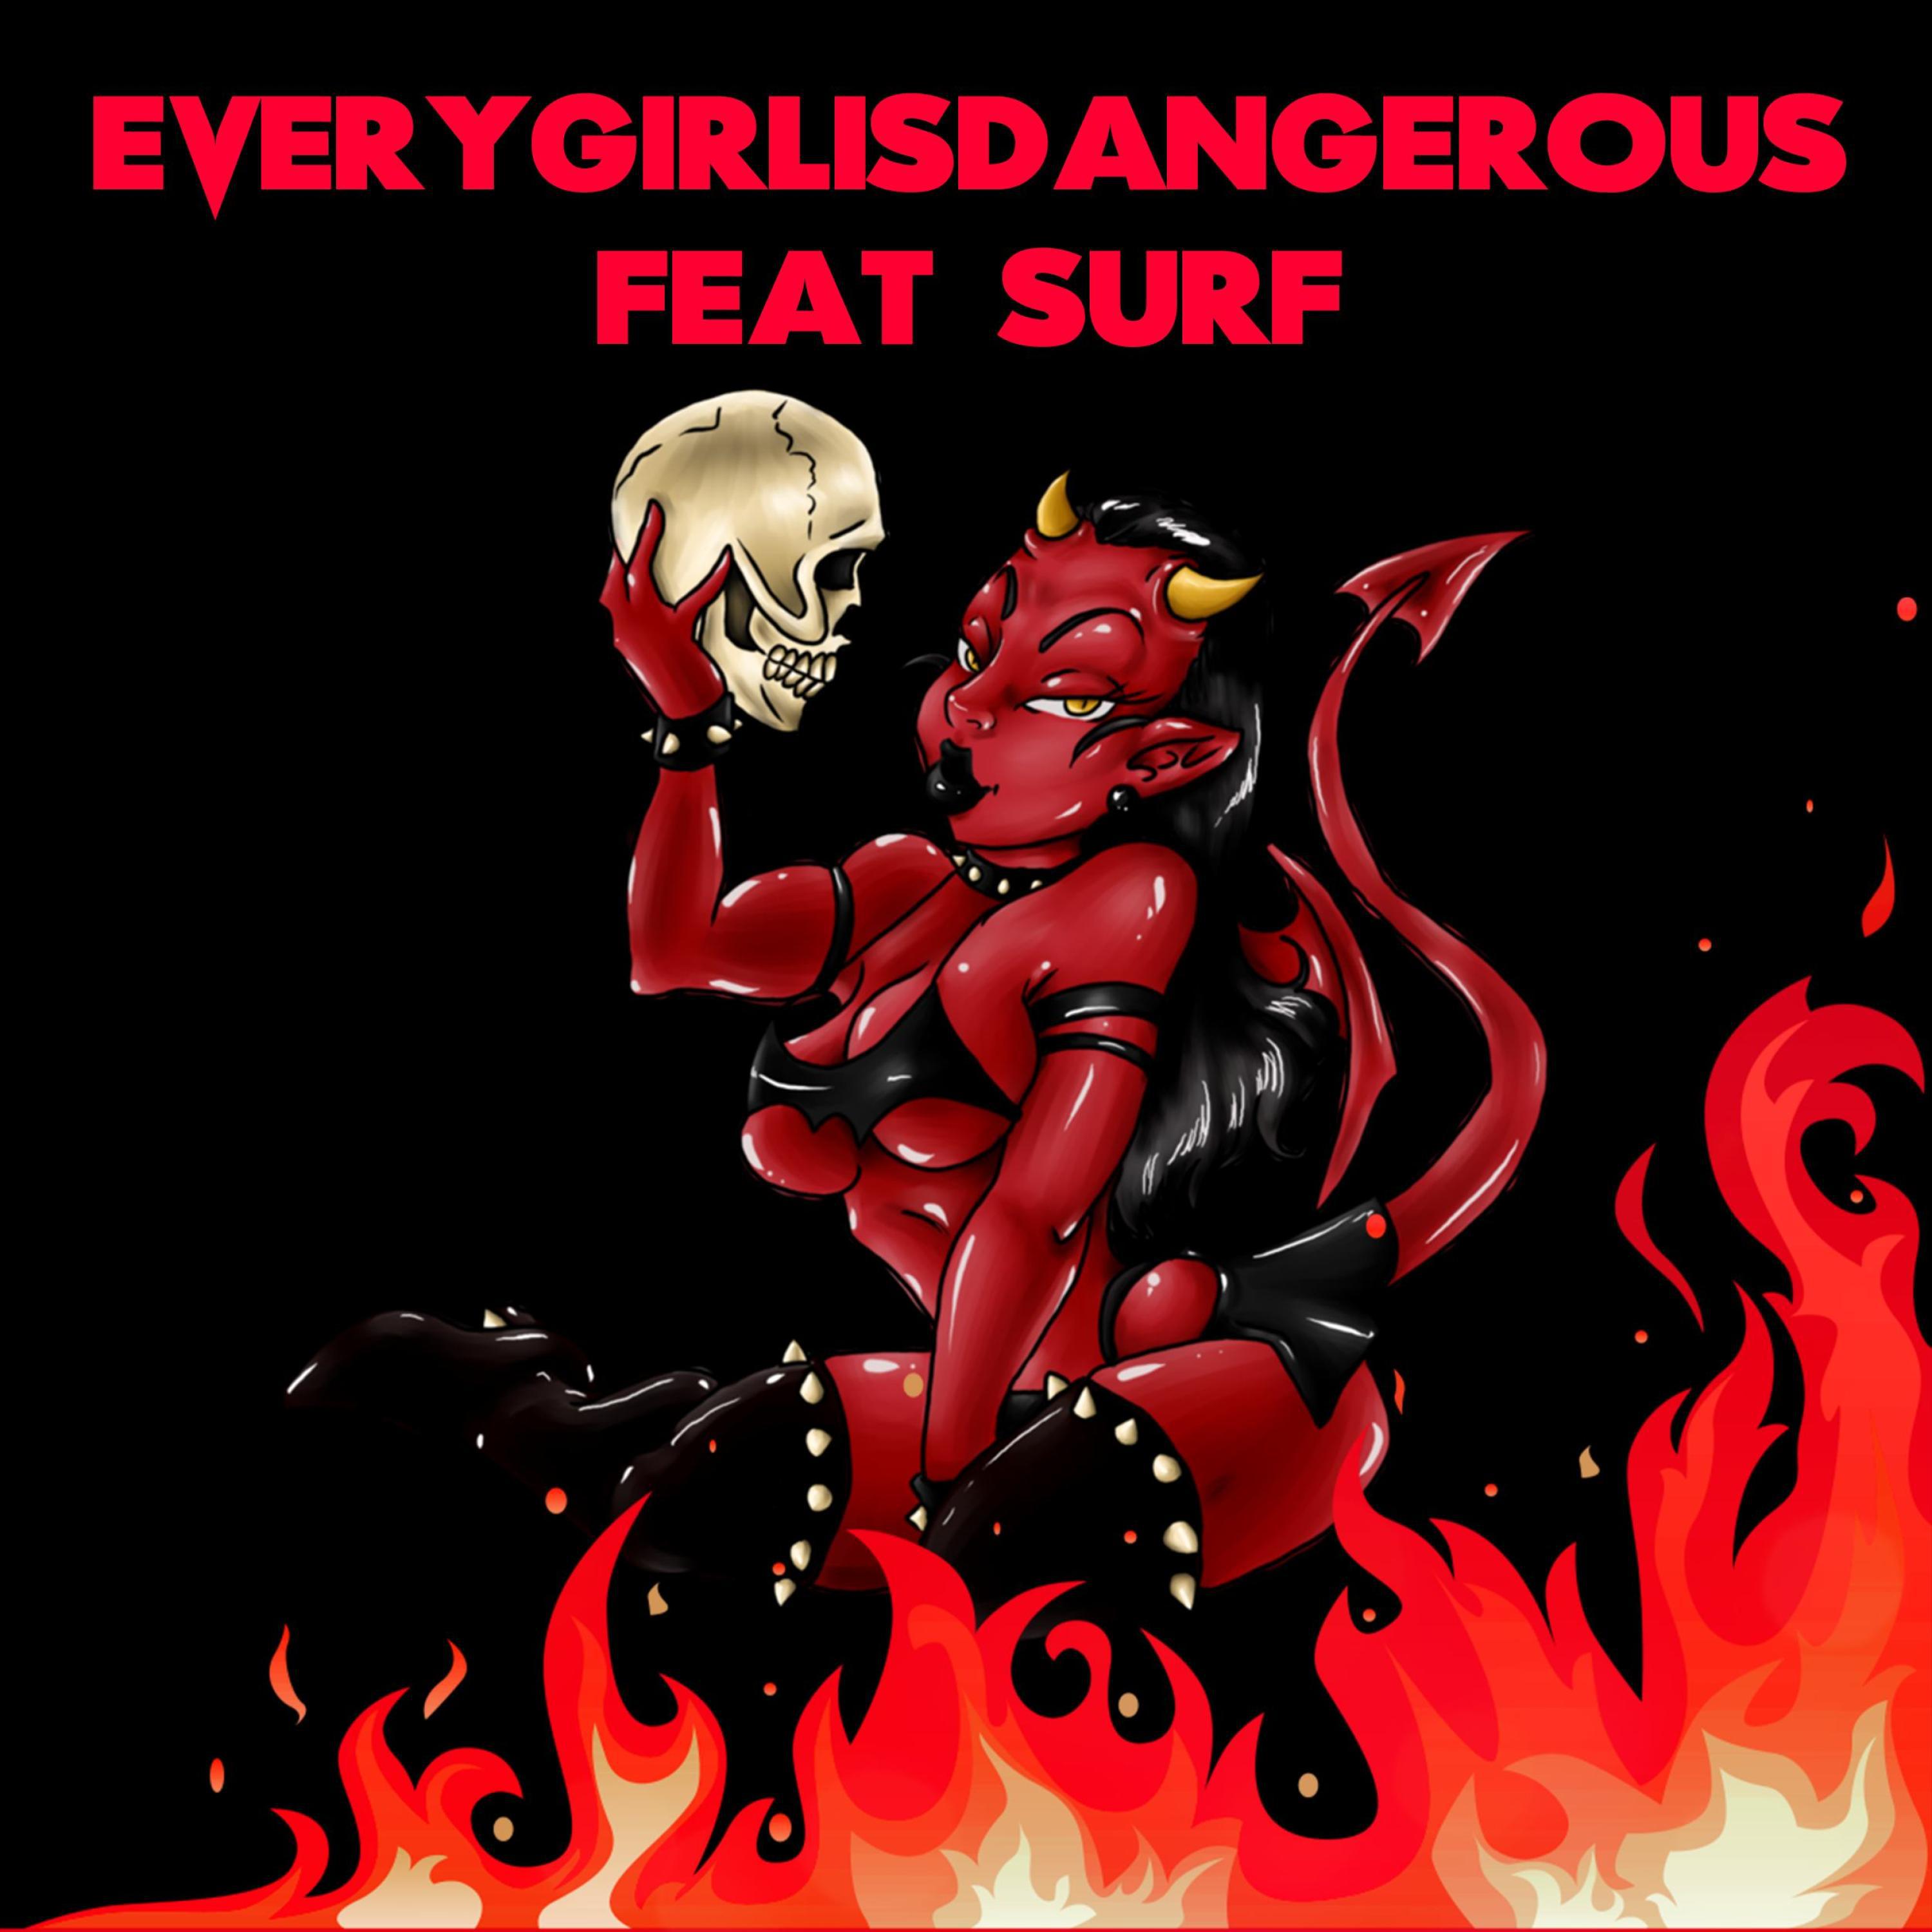 Young River - EVERYGIRLISDANGEROUS (feat. Surf)